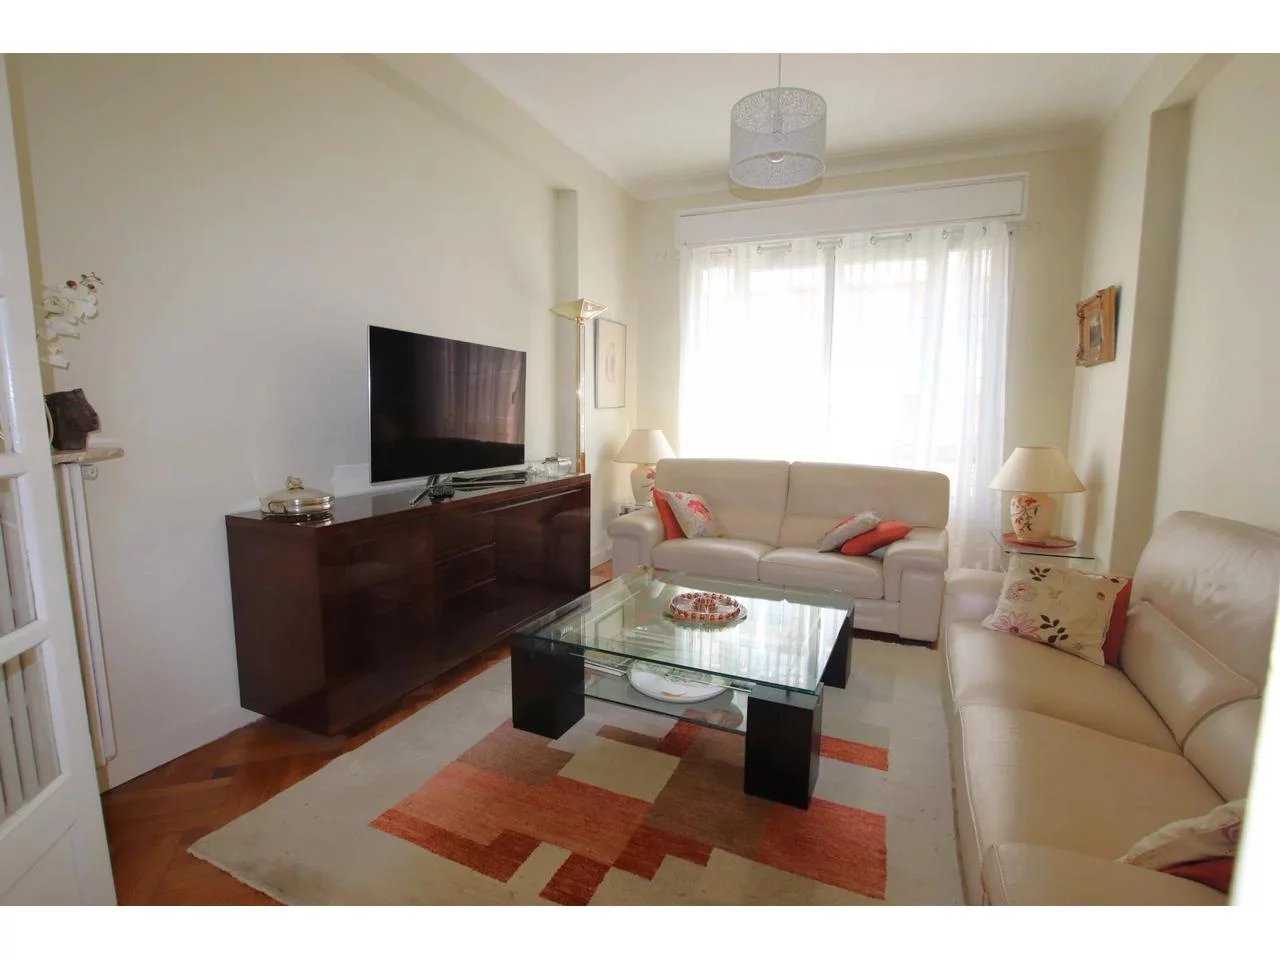 Appartement  3 Rooms 71.36m2  for sale   479 000 €